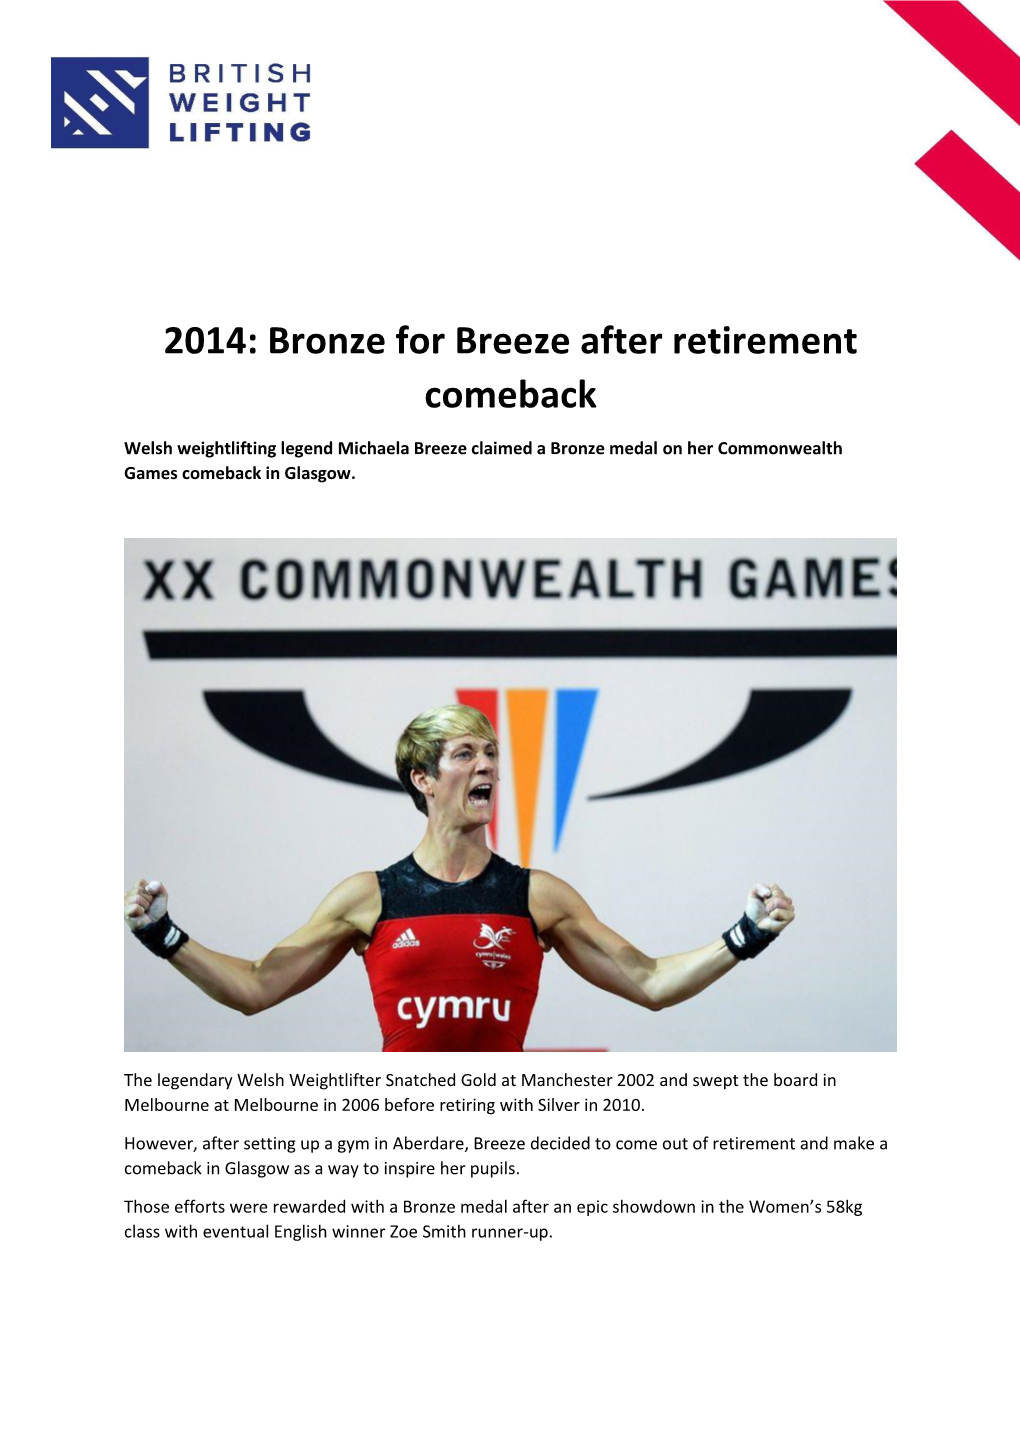 2014: Bronze for Breeze After Retirement Comeback